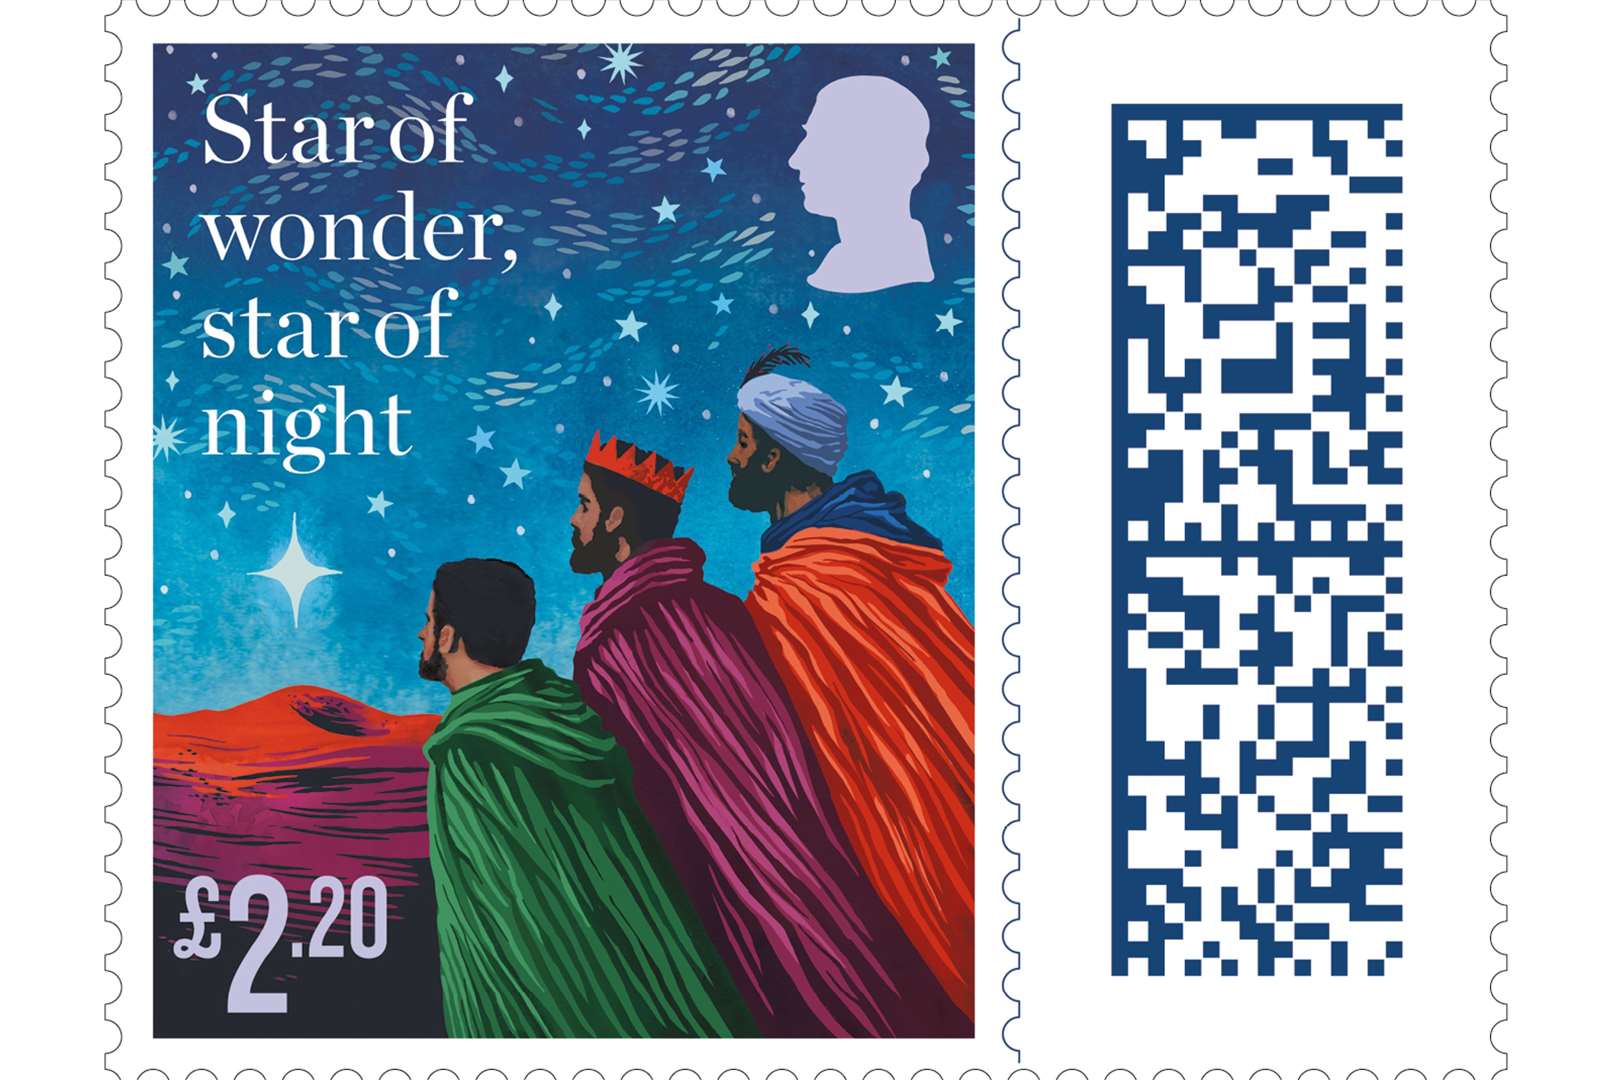 Scanning the barcode will take customers to a festive video to watch. Image: Royal Mail.